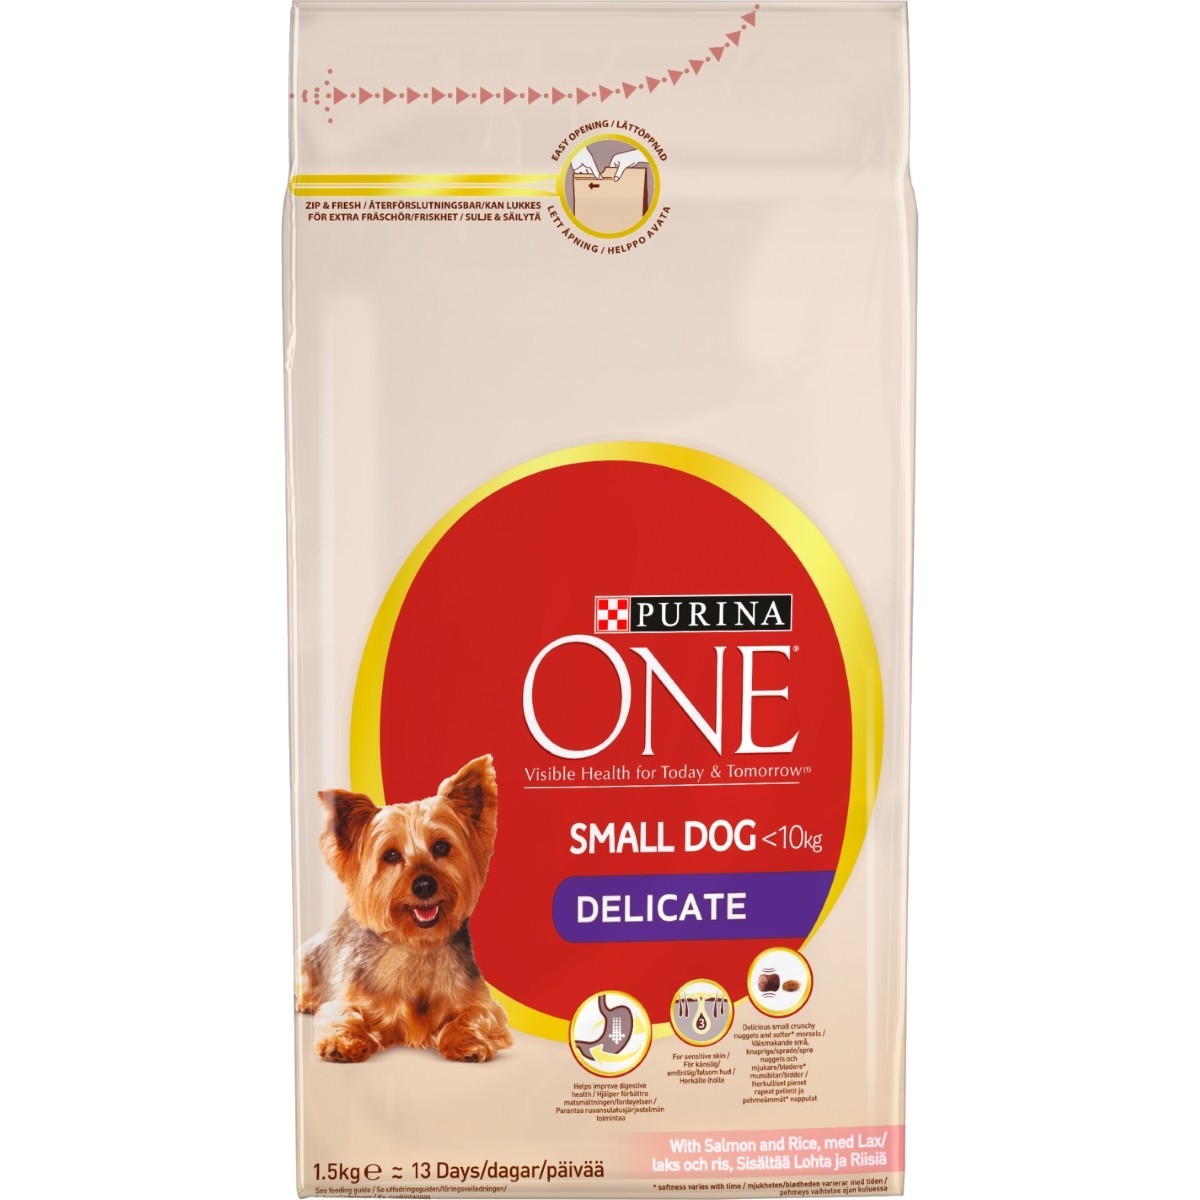 Purina One Delicate Small Dog Food Salmon Rice 1 5kg From 3 65